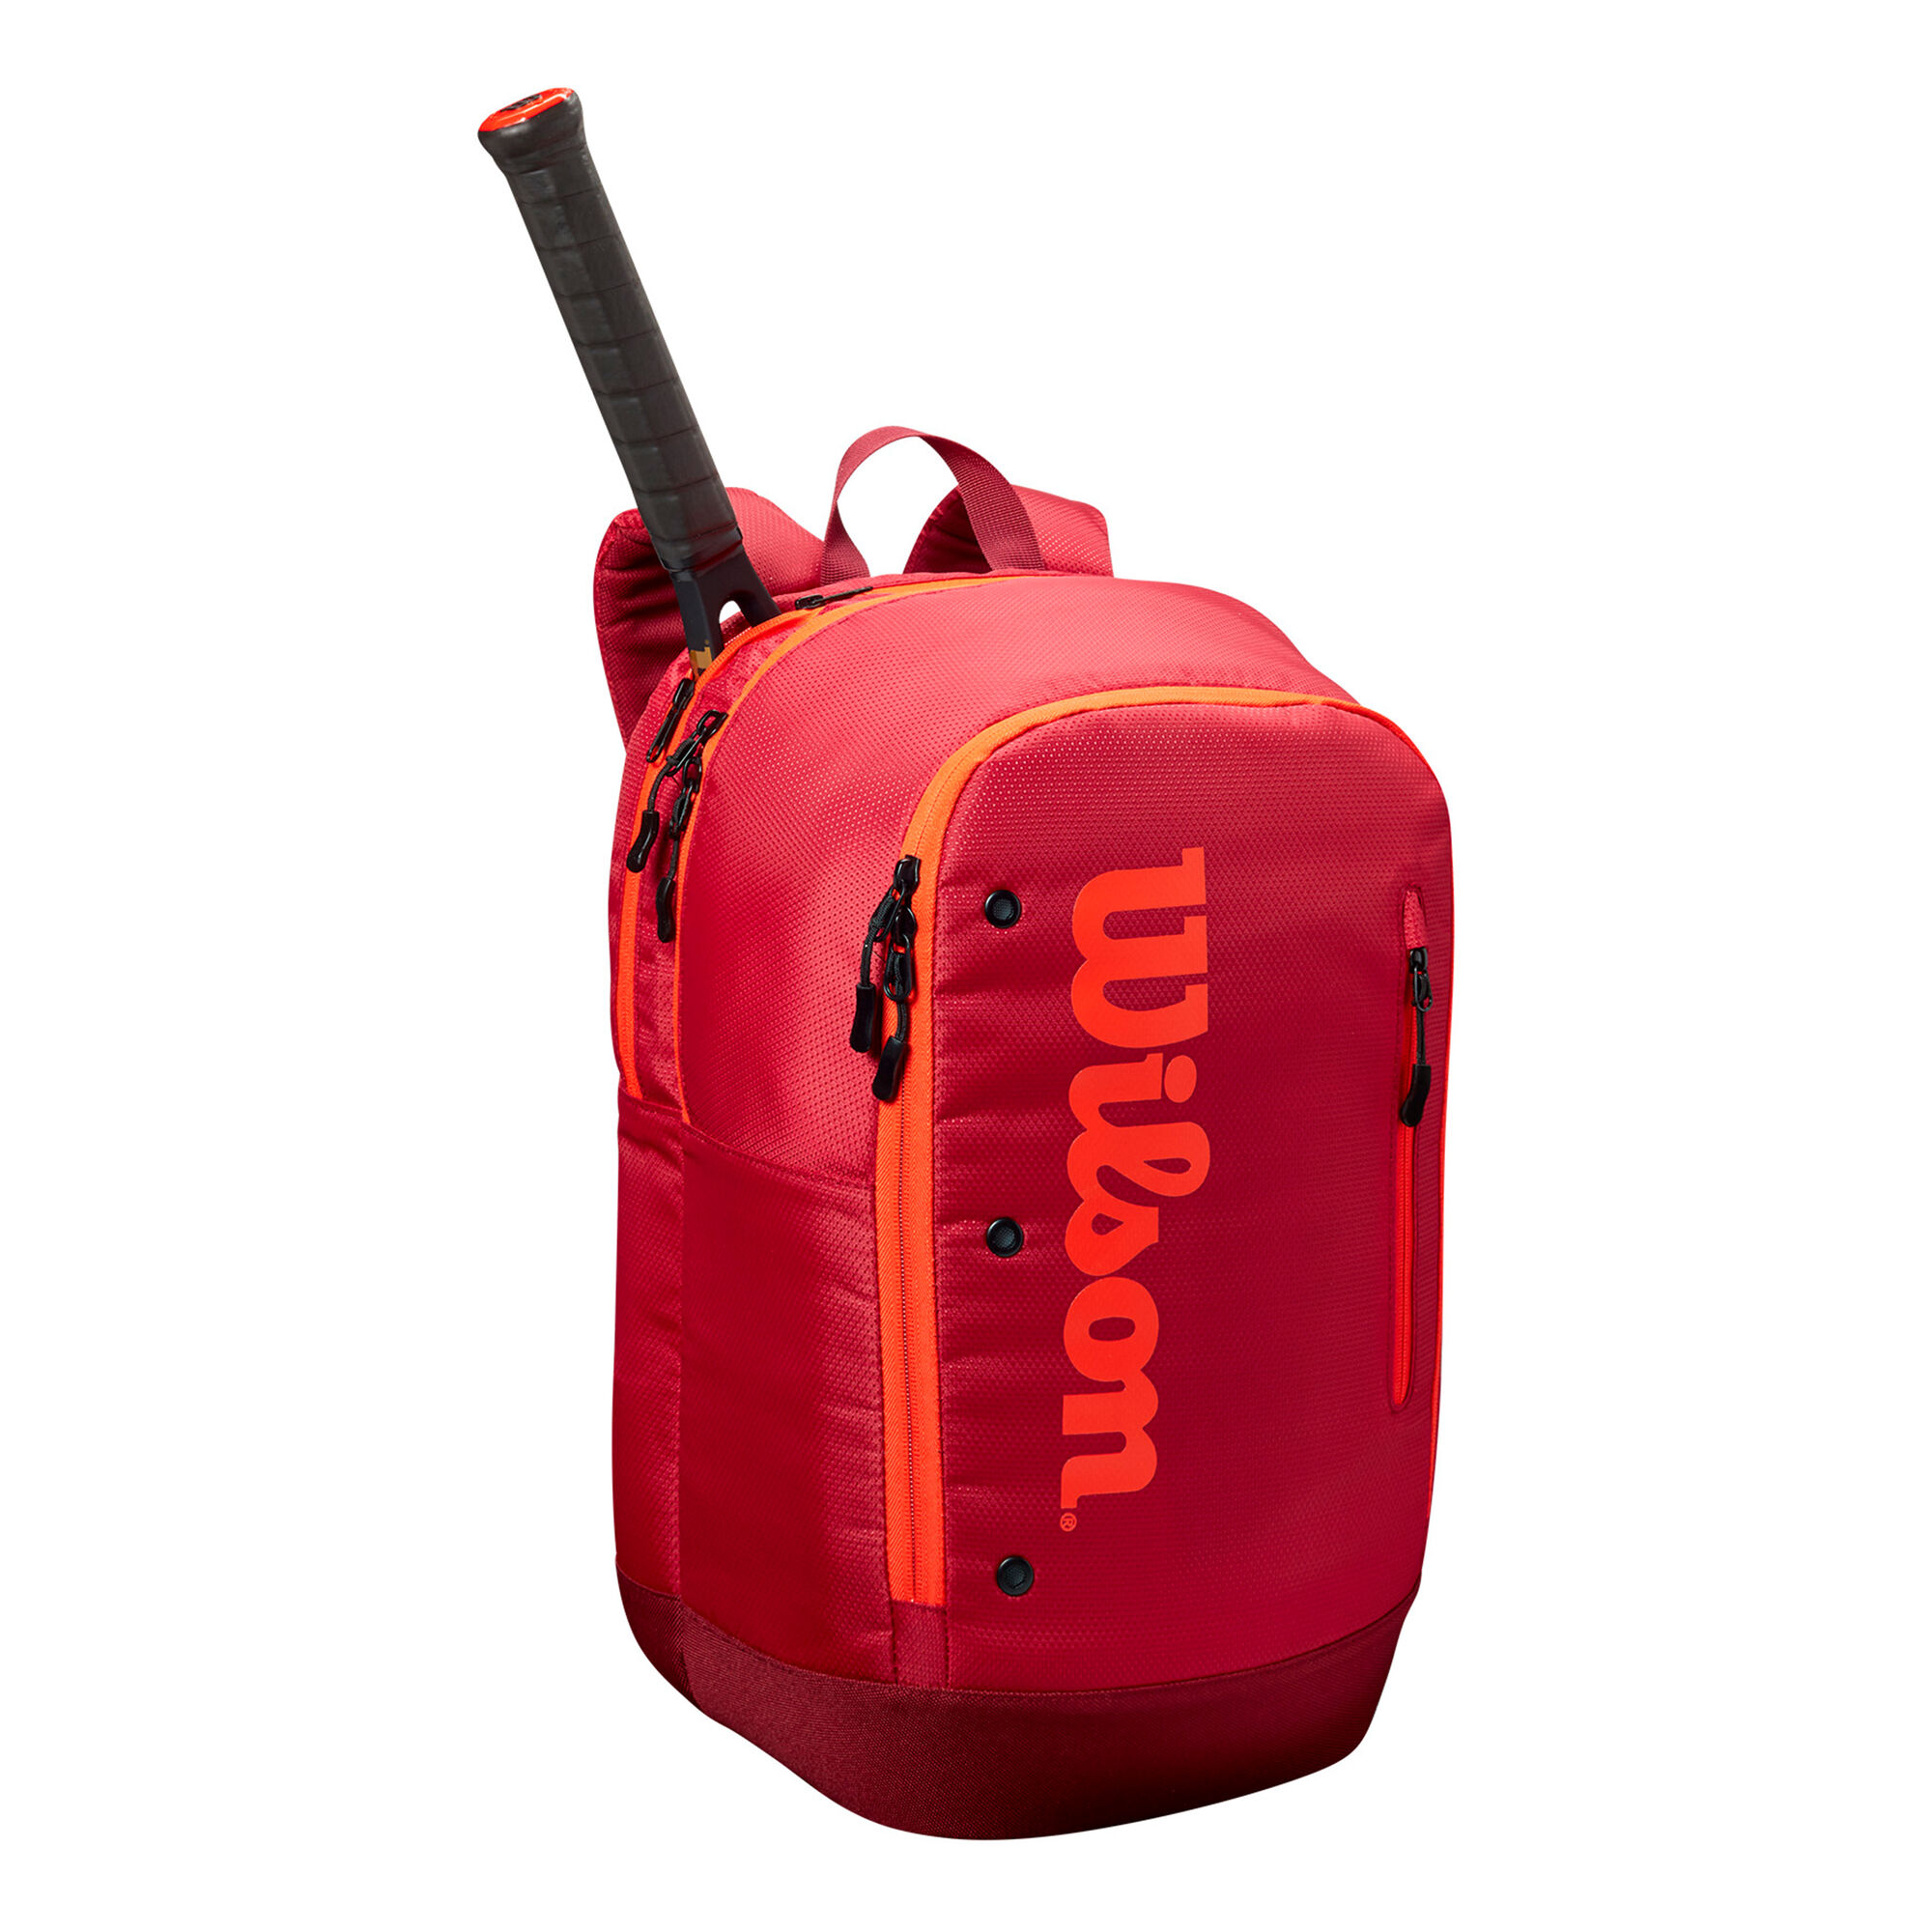 tennis tour backpack